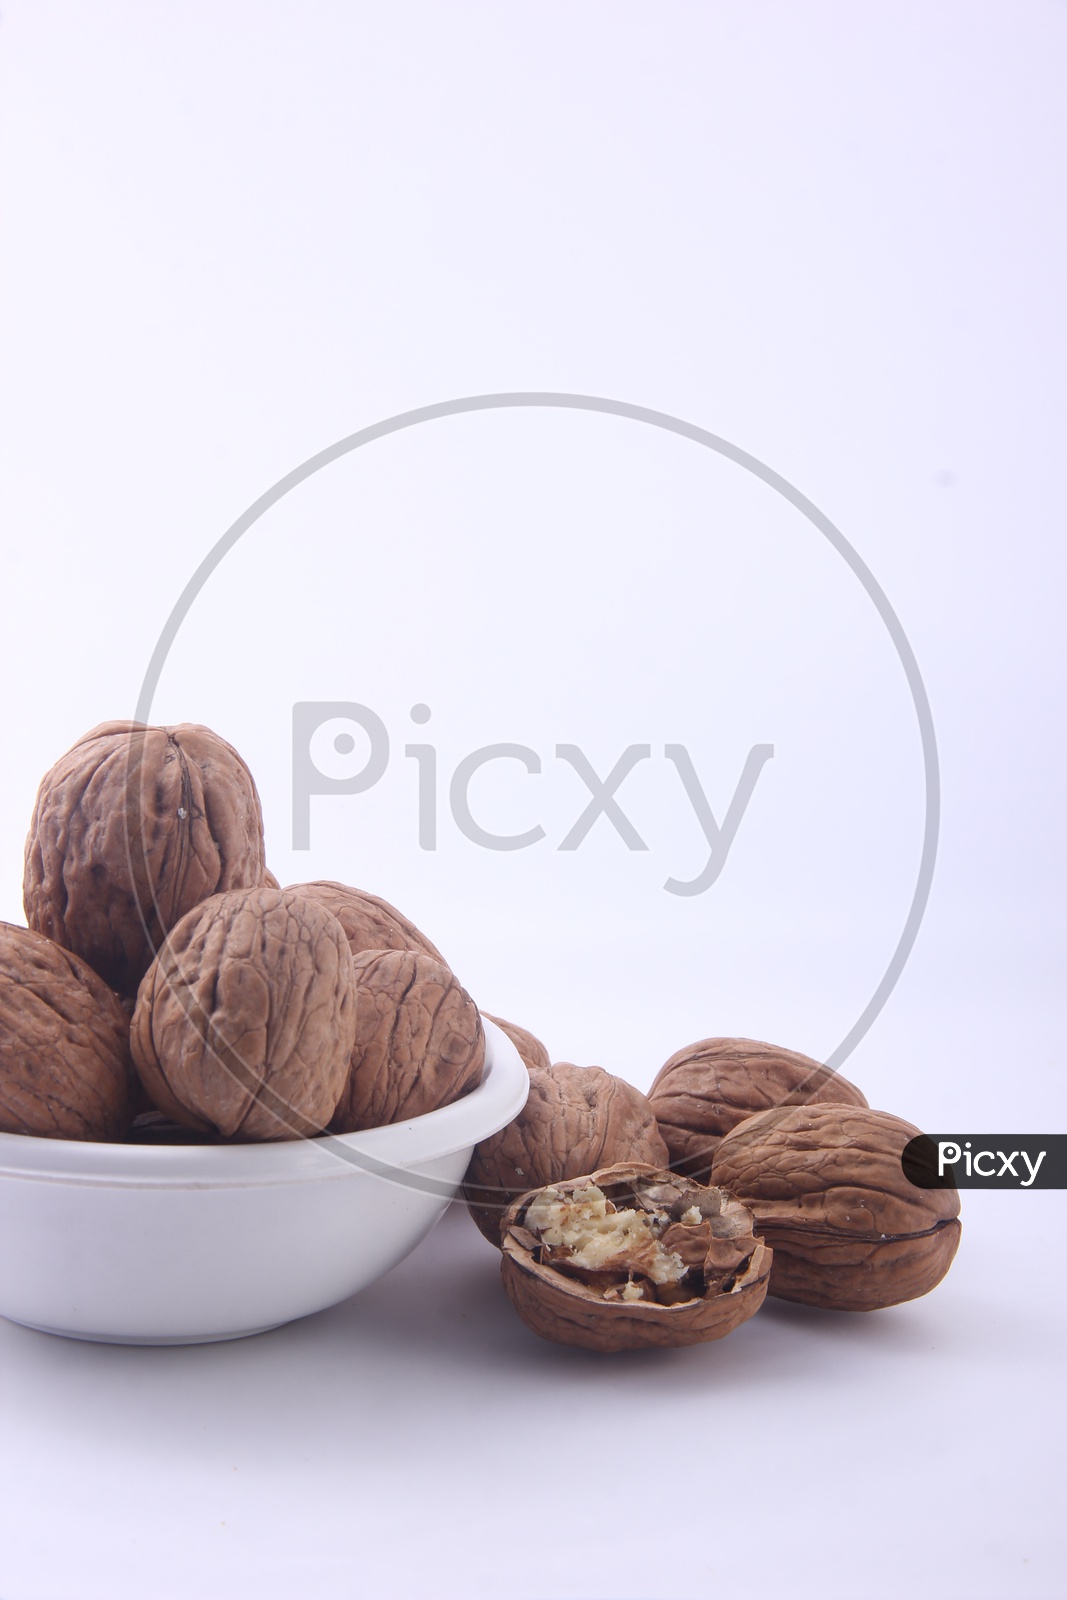 Wallnuts in Bowl  Composition Shot on a Isolated White Background